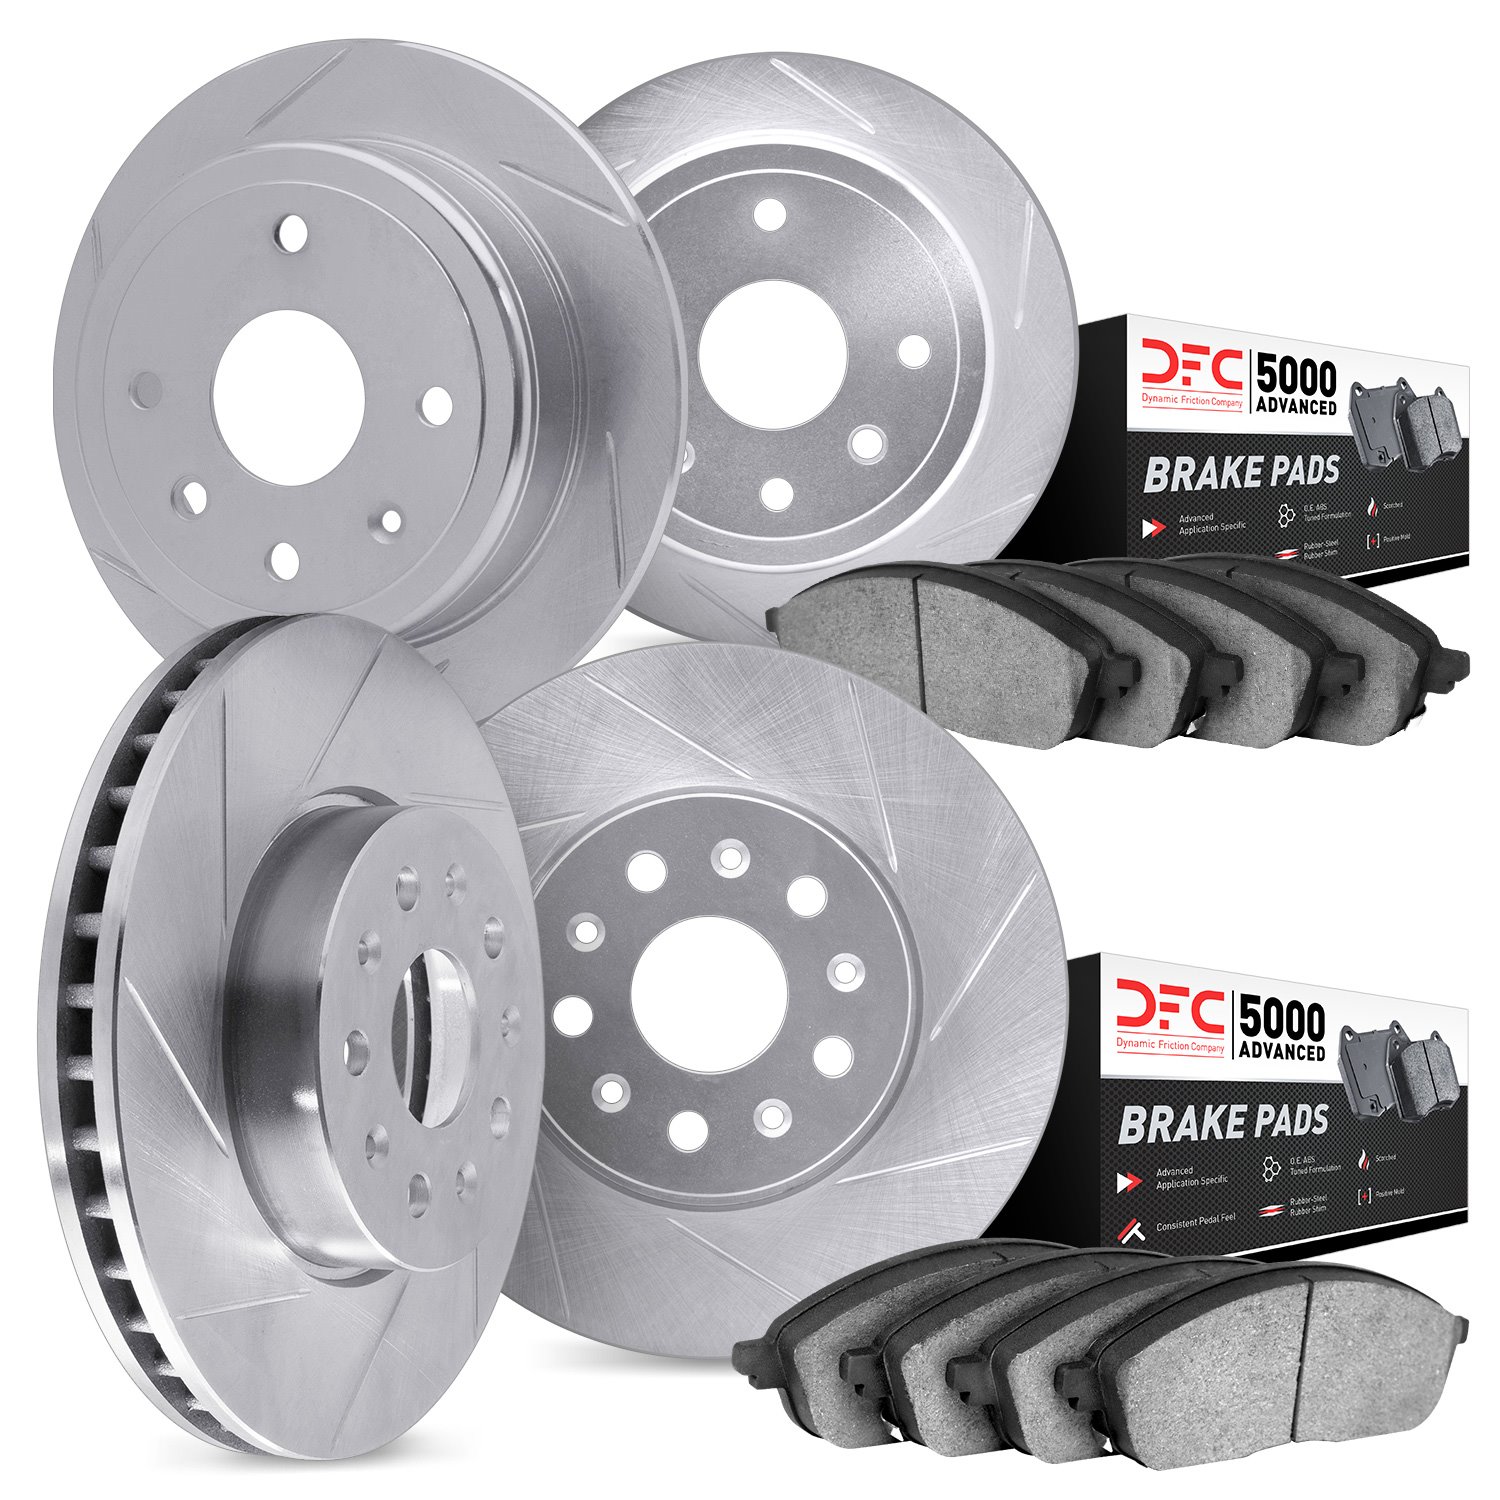 5504-74009 Slotted Brake Rotors w/5000 Advanced Brake Pads Kit [Silver], 2015-2021 Multiple Makes/Models, Position: Front and Re